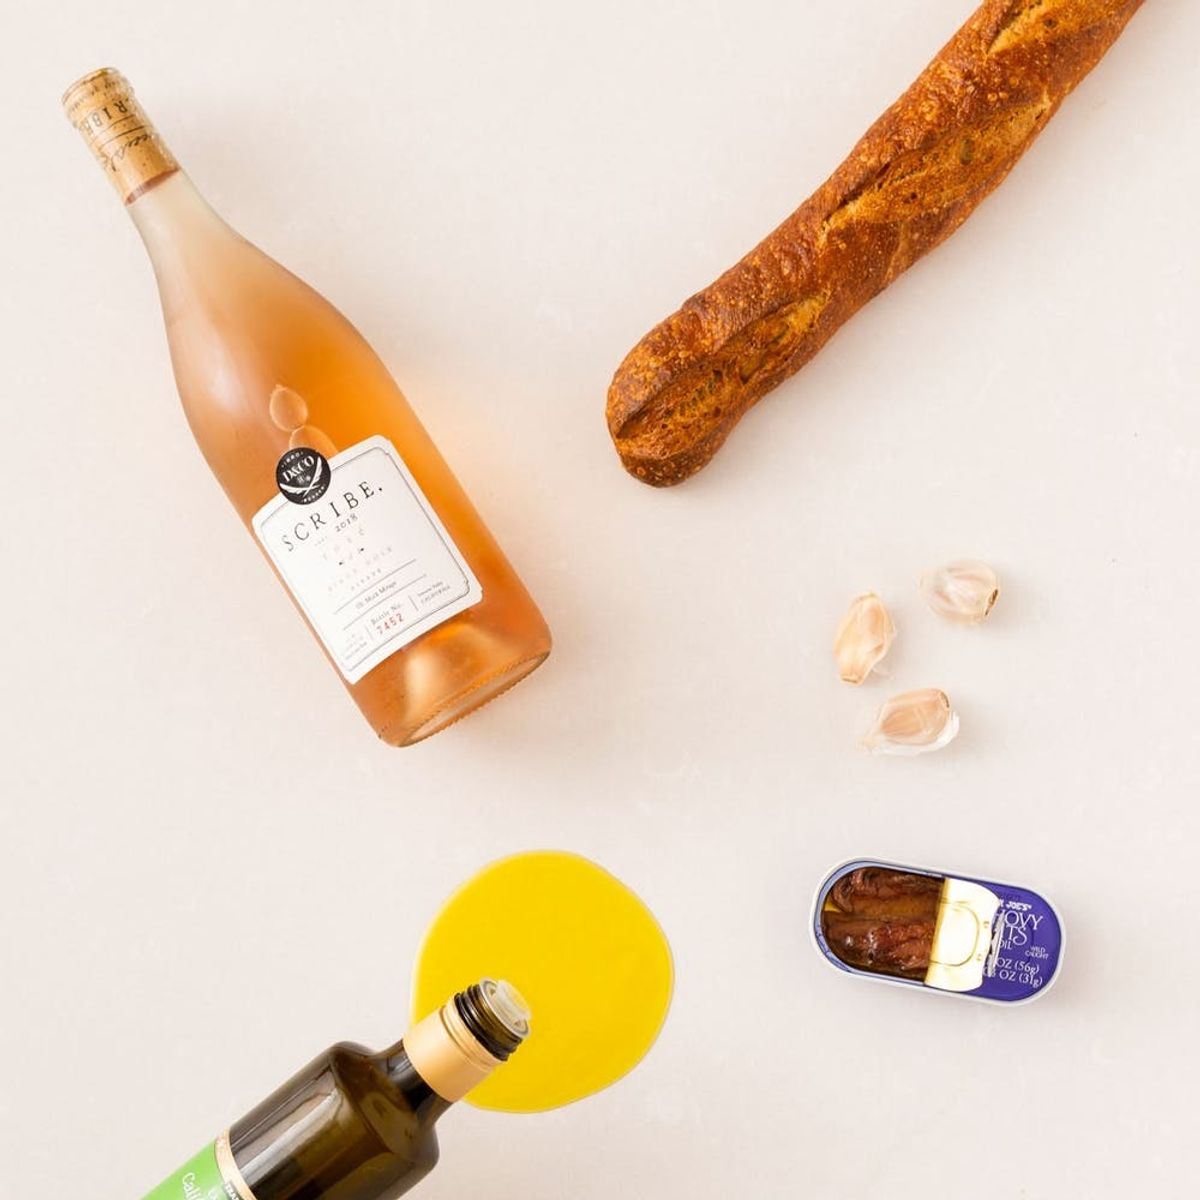 Try This Unexpected Pairing the Next Time You #RoséAllDay